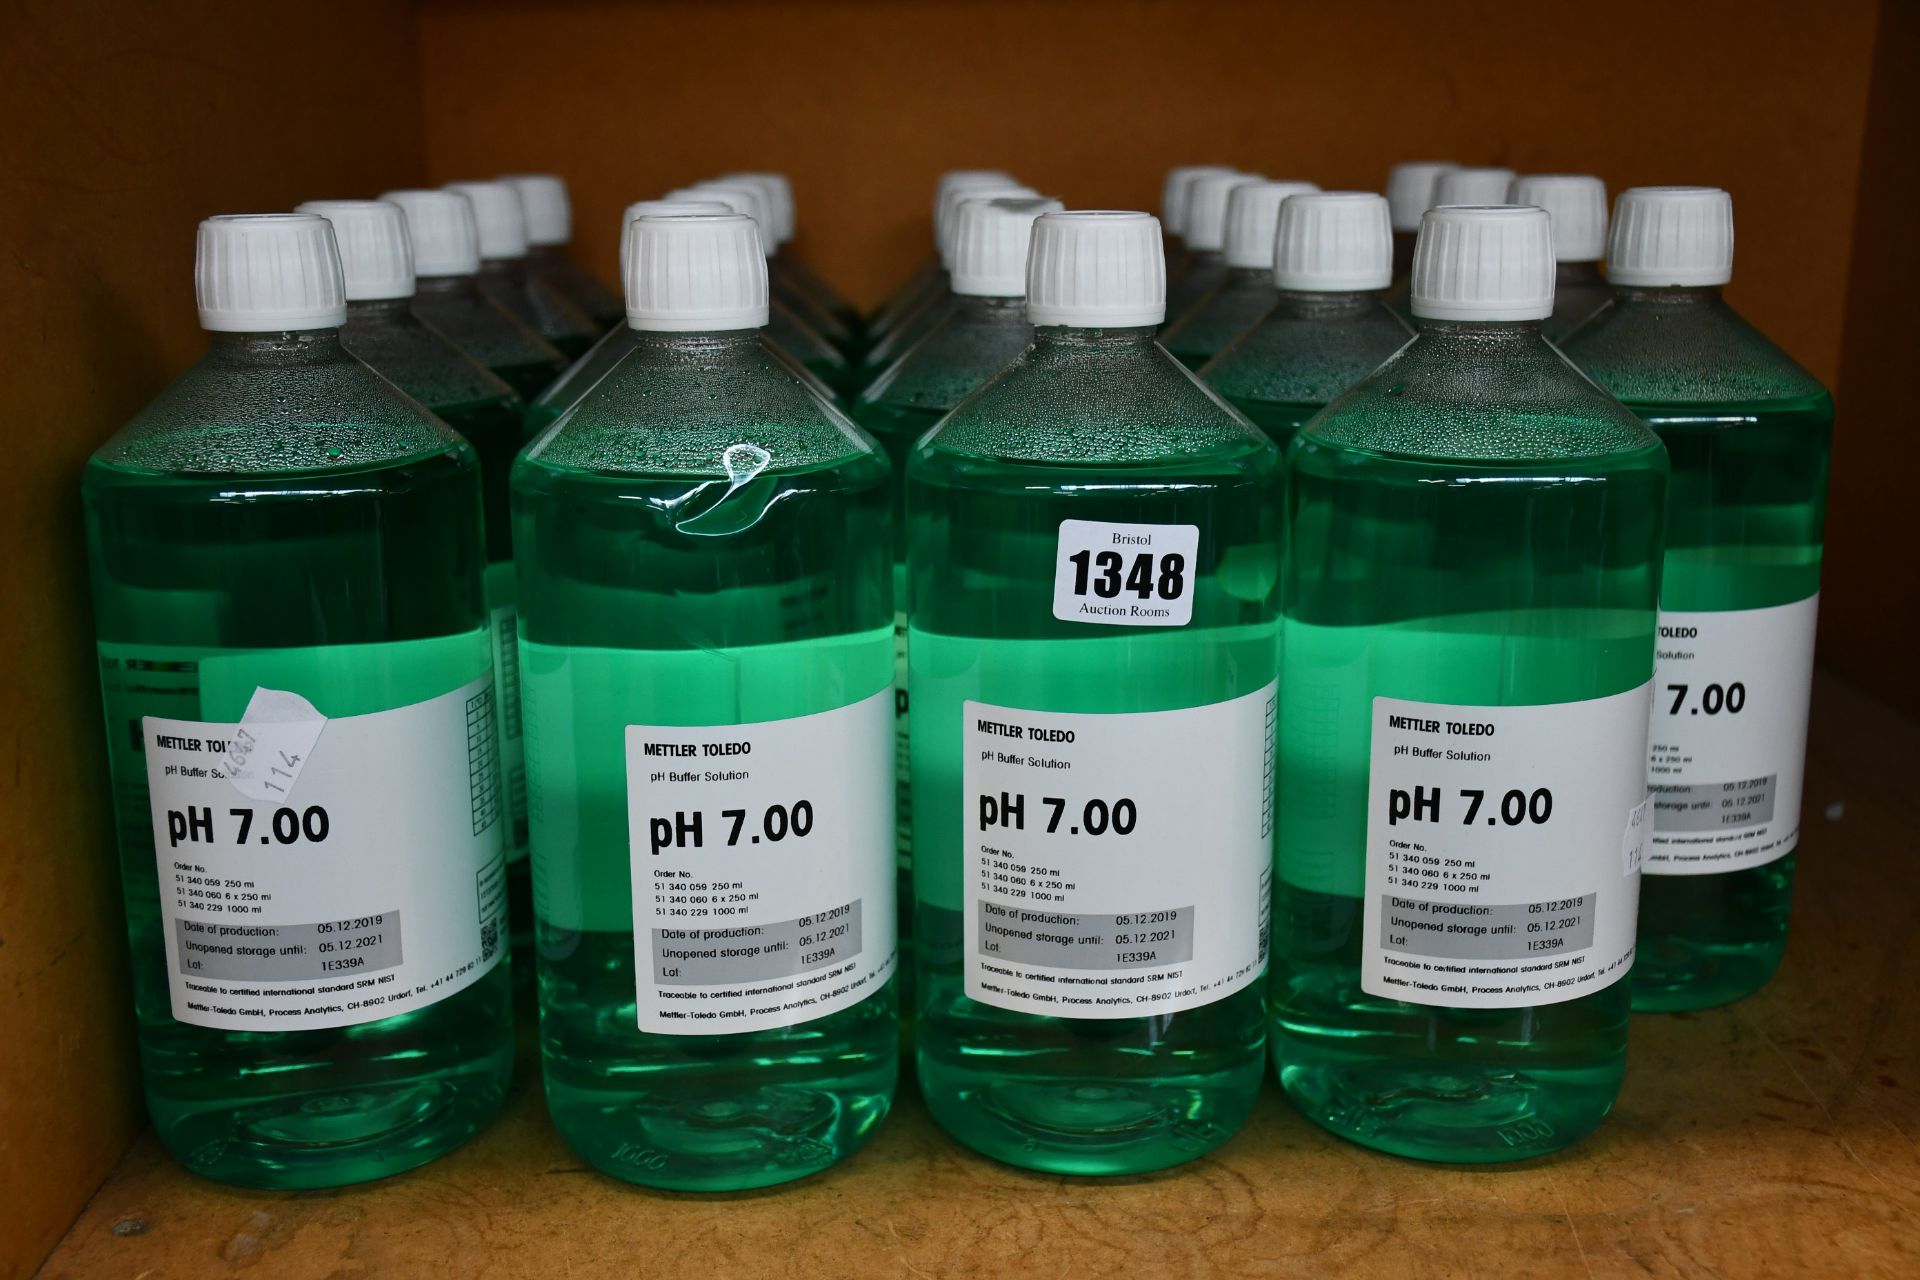 A quantity of Mettler Toledo pH 7.00 buffer solution (Approximately 20 x 1000ml).